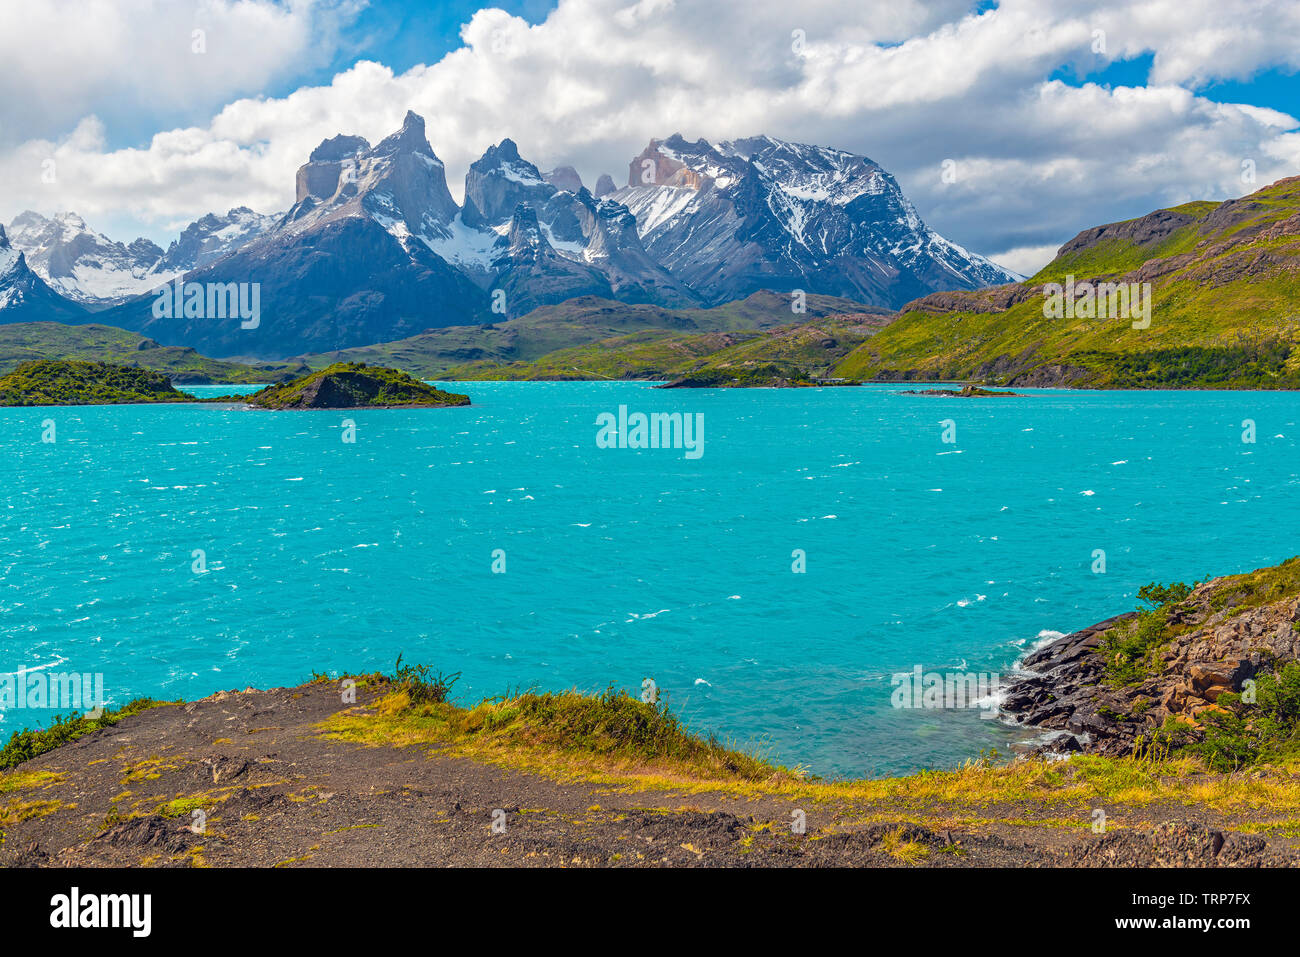 The turquoise waters of Pehoe Lake, Torres del Paine national park, Patagonia, Chile. Stock Photo